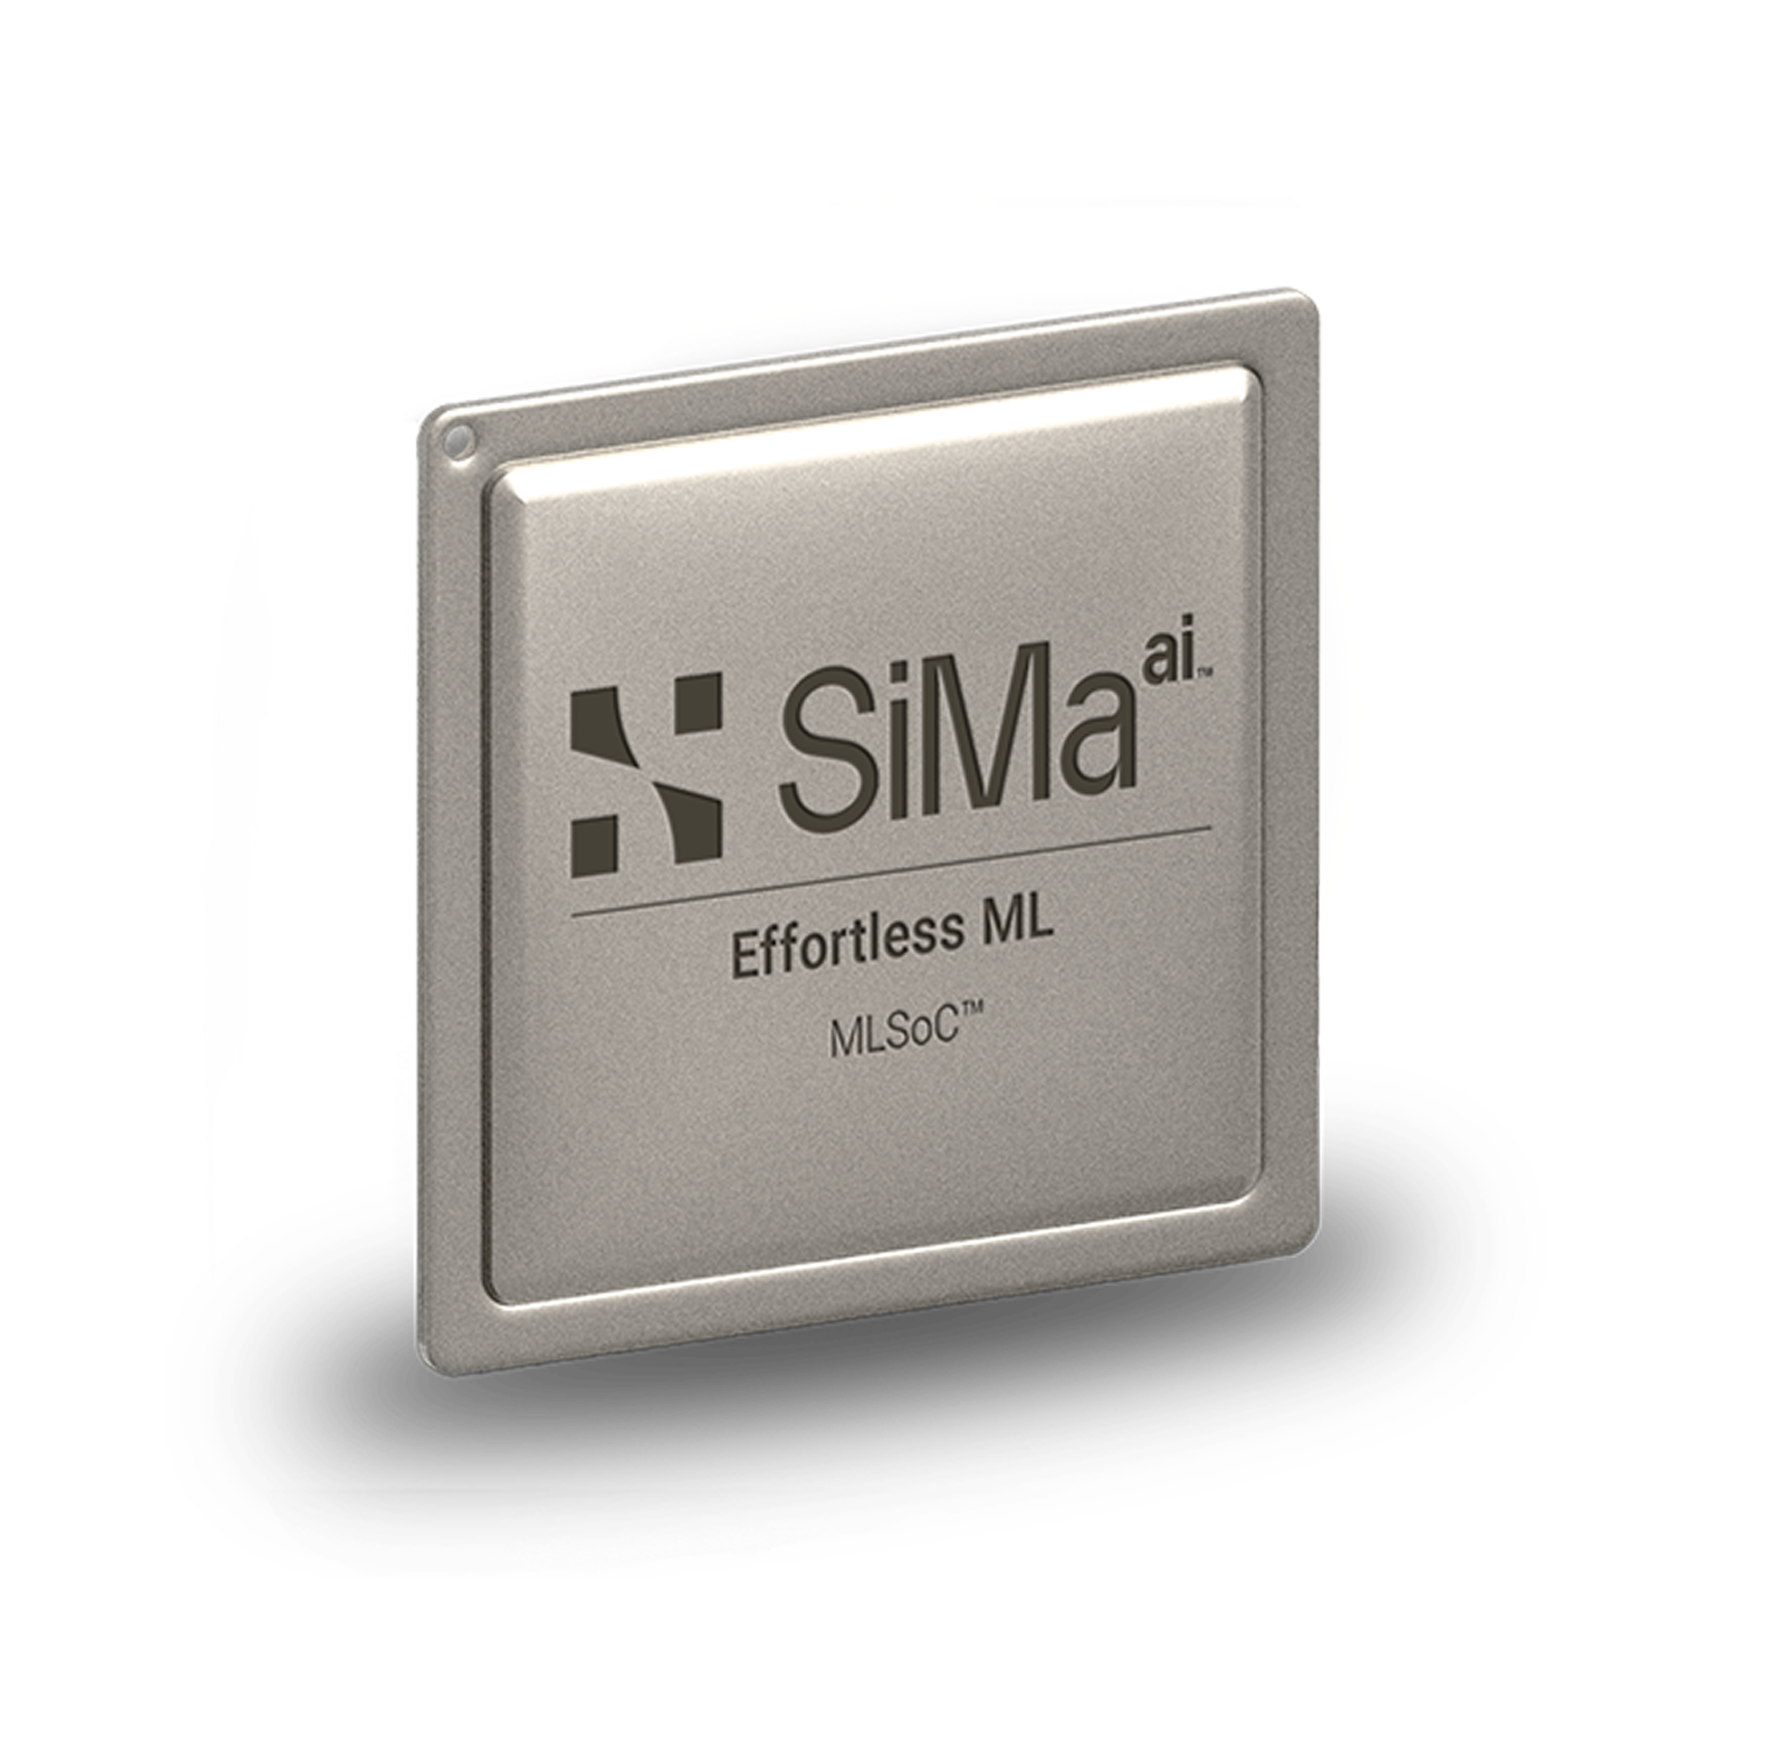 Machine learning chipmaker SiMa.ai enables low-code AI model development at the edge